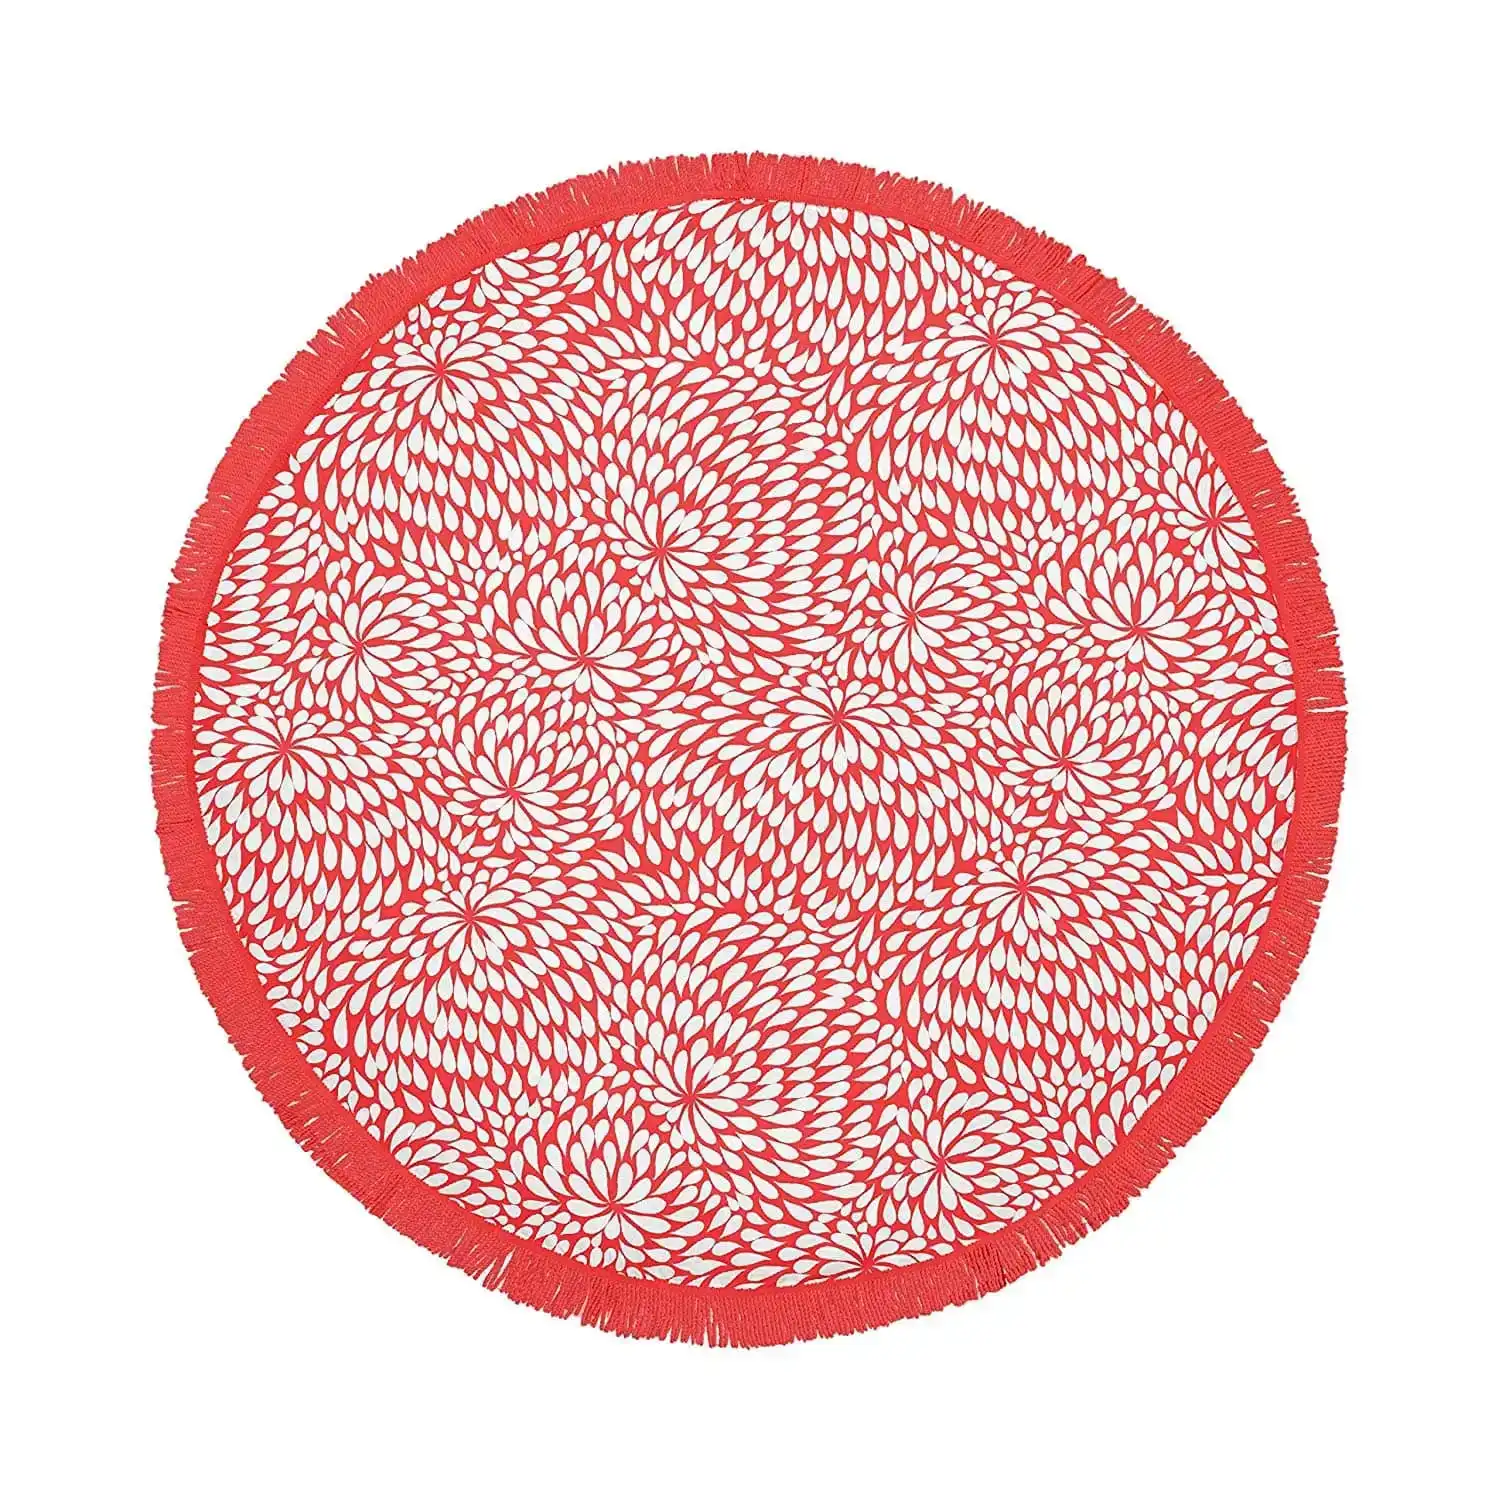 Round Beach Towel with Tinsel - Red